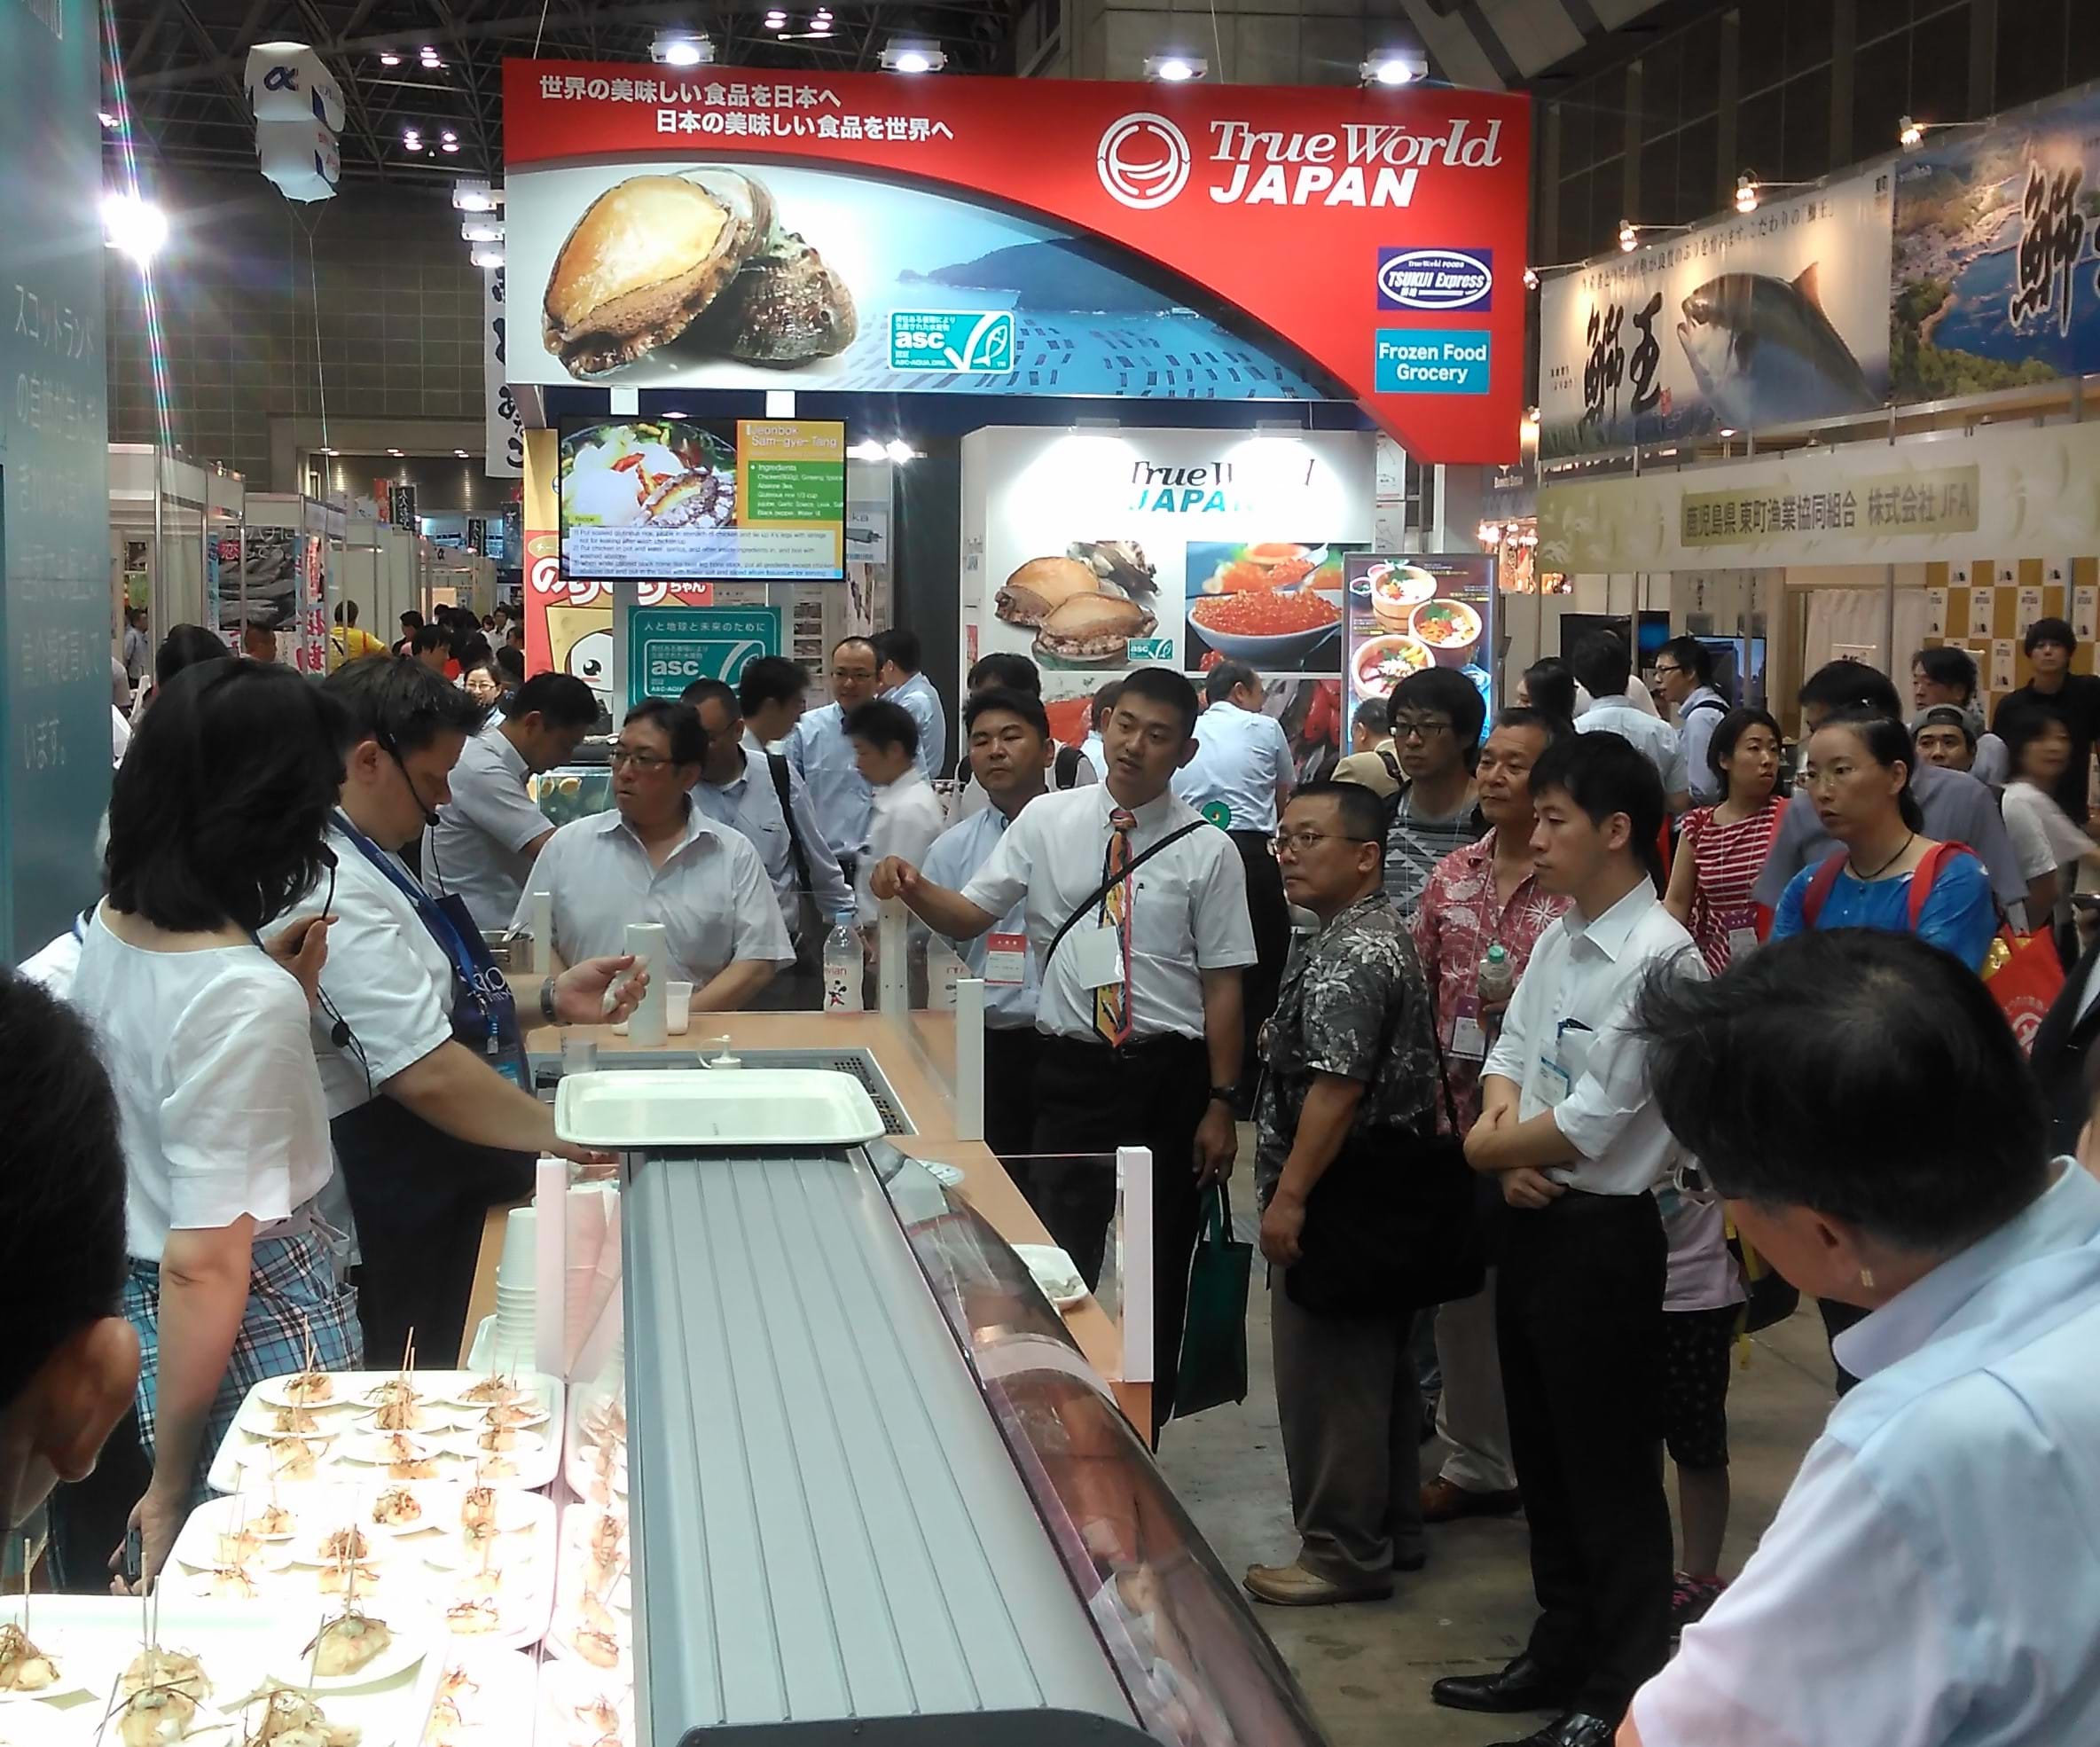 A crowd mingle at a previous seafood expo in Japan.